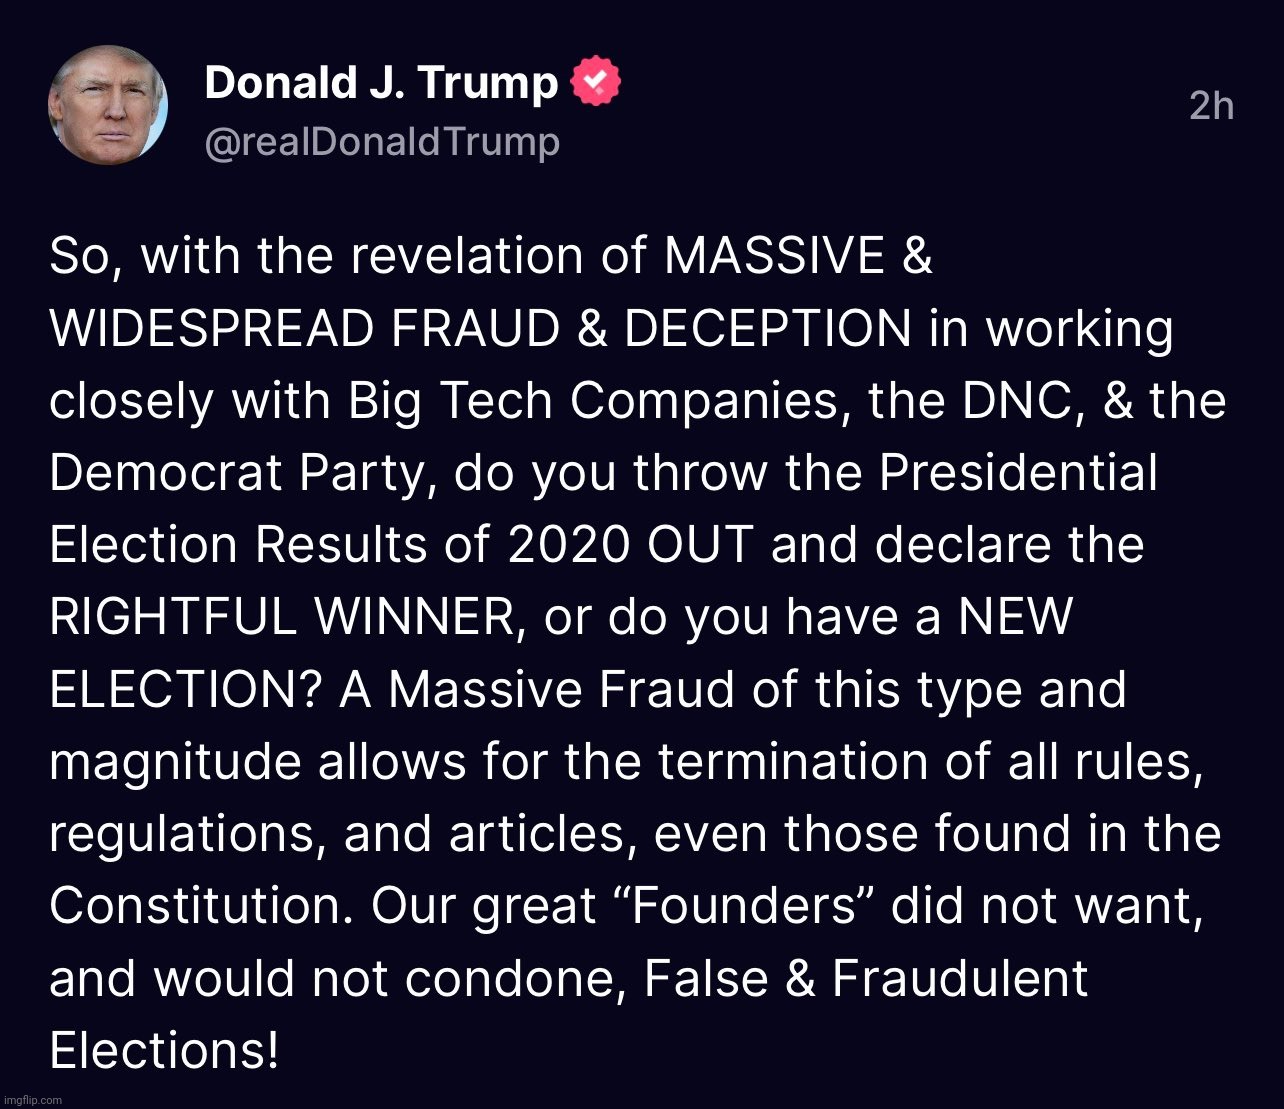 No anti-seditious, anti-law, anti-Liberty, anti-Constitution, anti-American anything seen here from il Douche Dondolf Trump | image tagged in donald trump,trump,truth social,traitor trump,ill douche,trump tweet | made w/ Imgflip meme maker